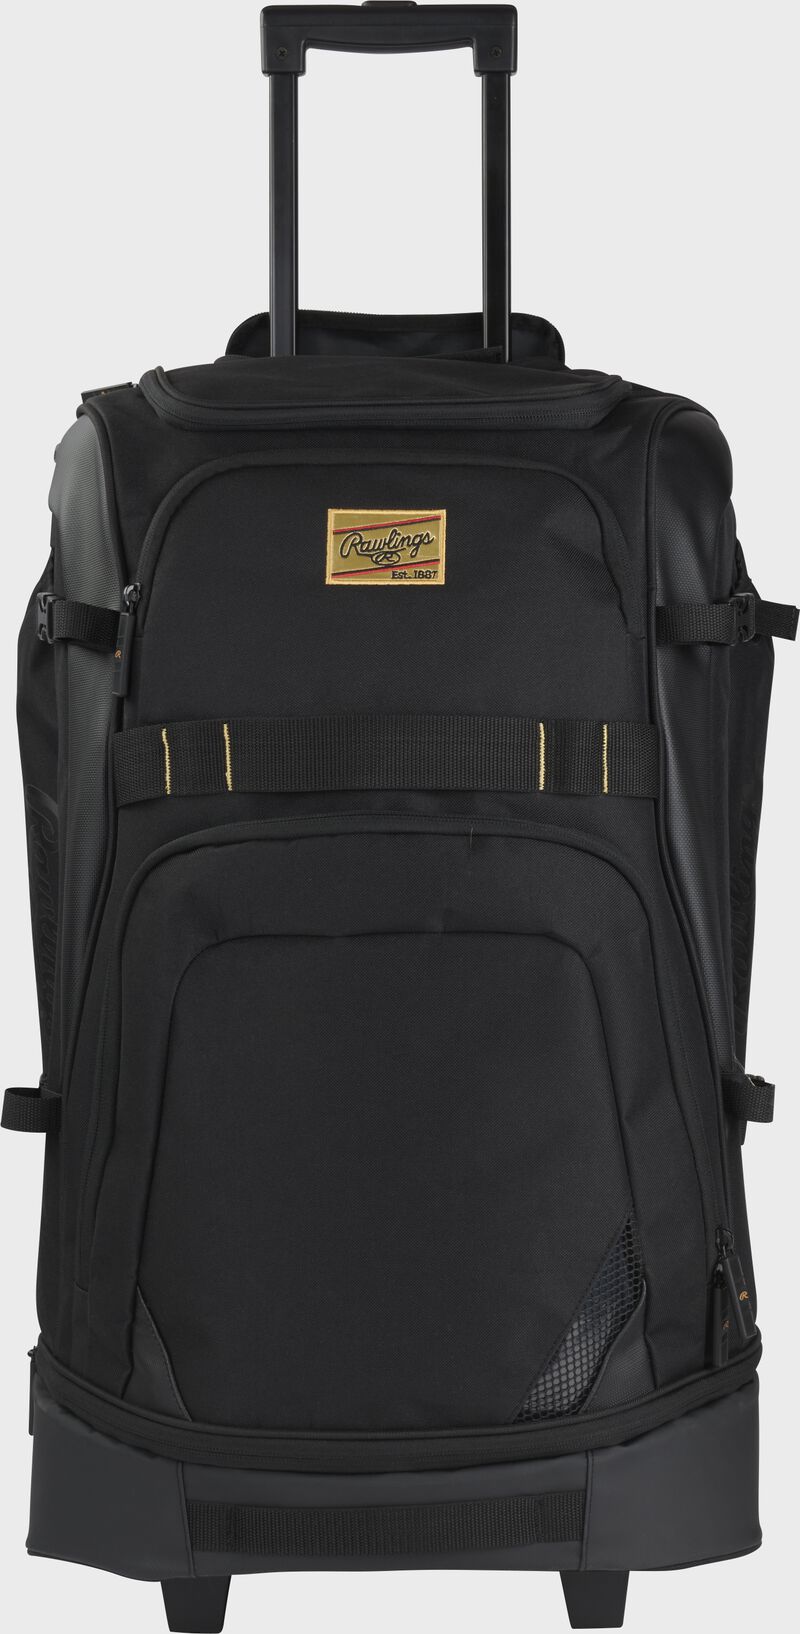 RAWLINGS GOLD COLLECTION WHEELED BAG: BLACK